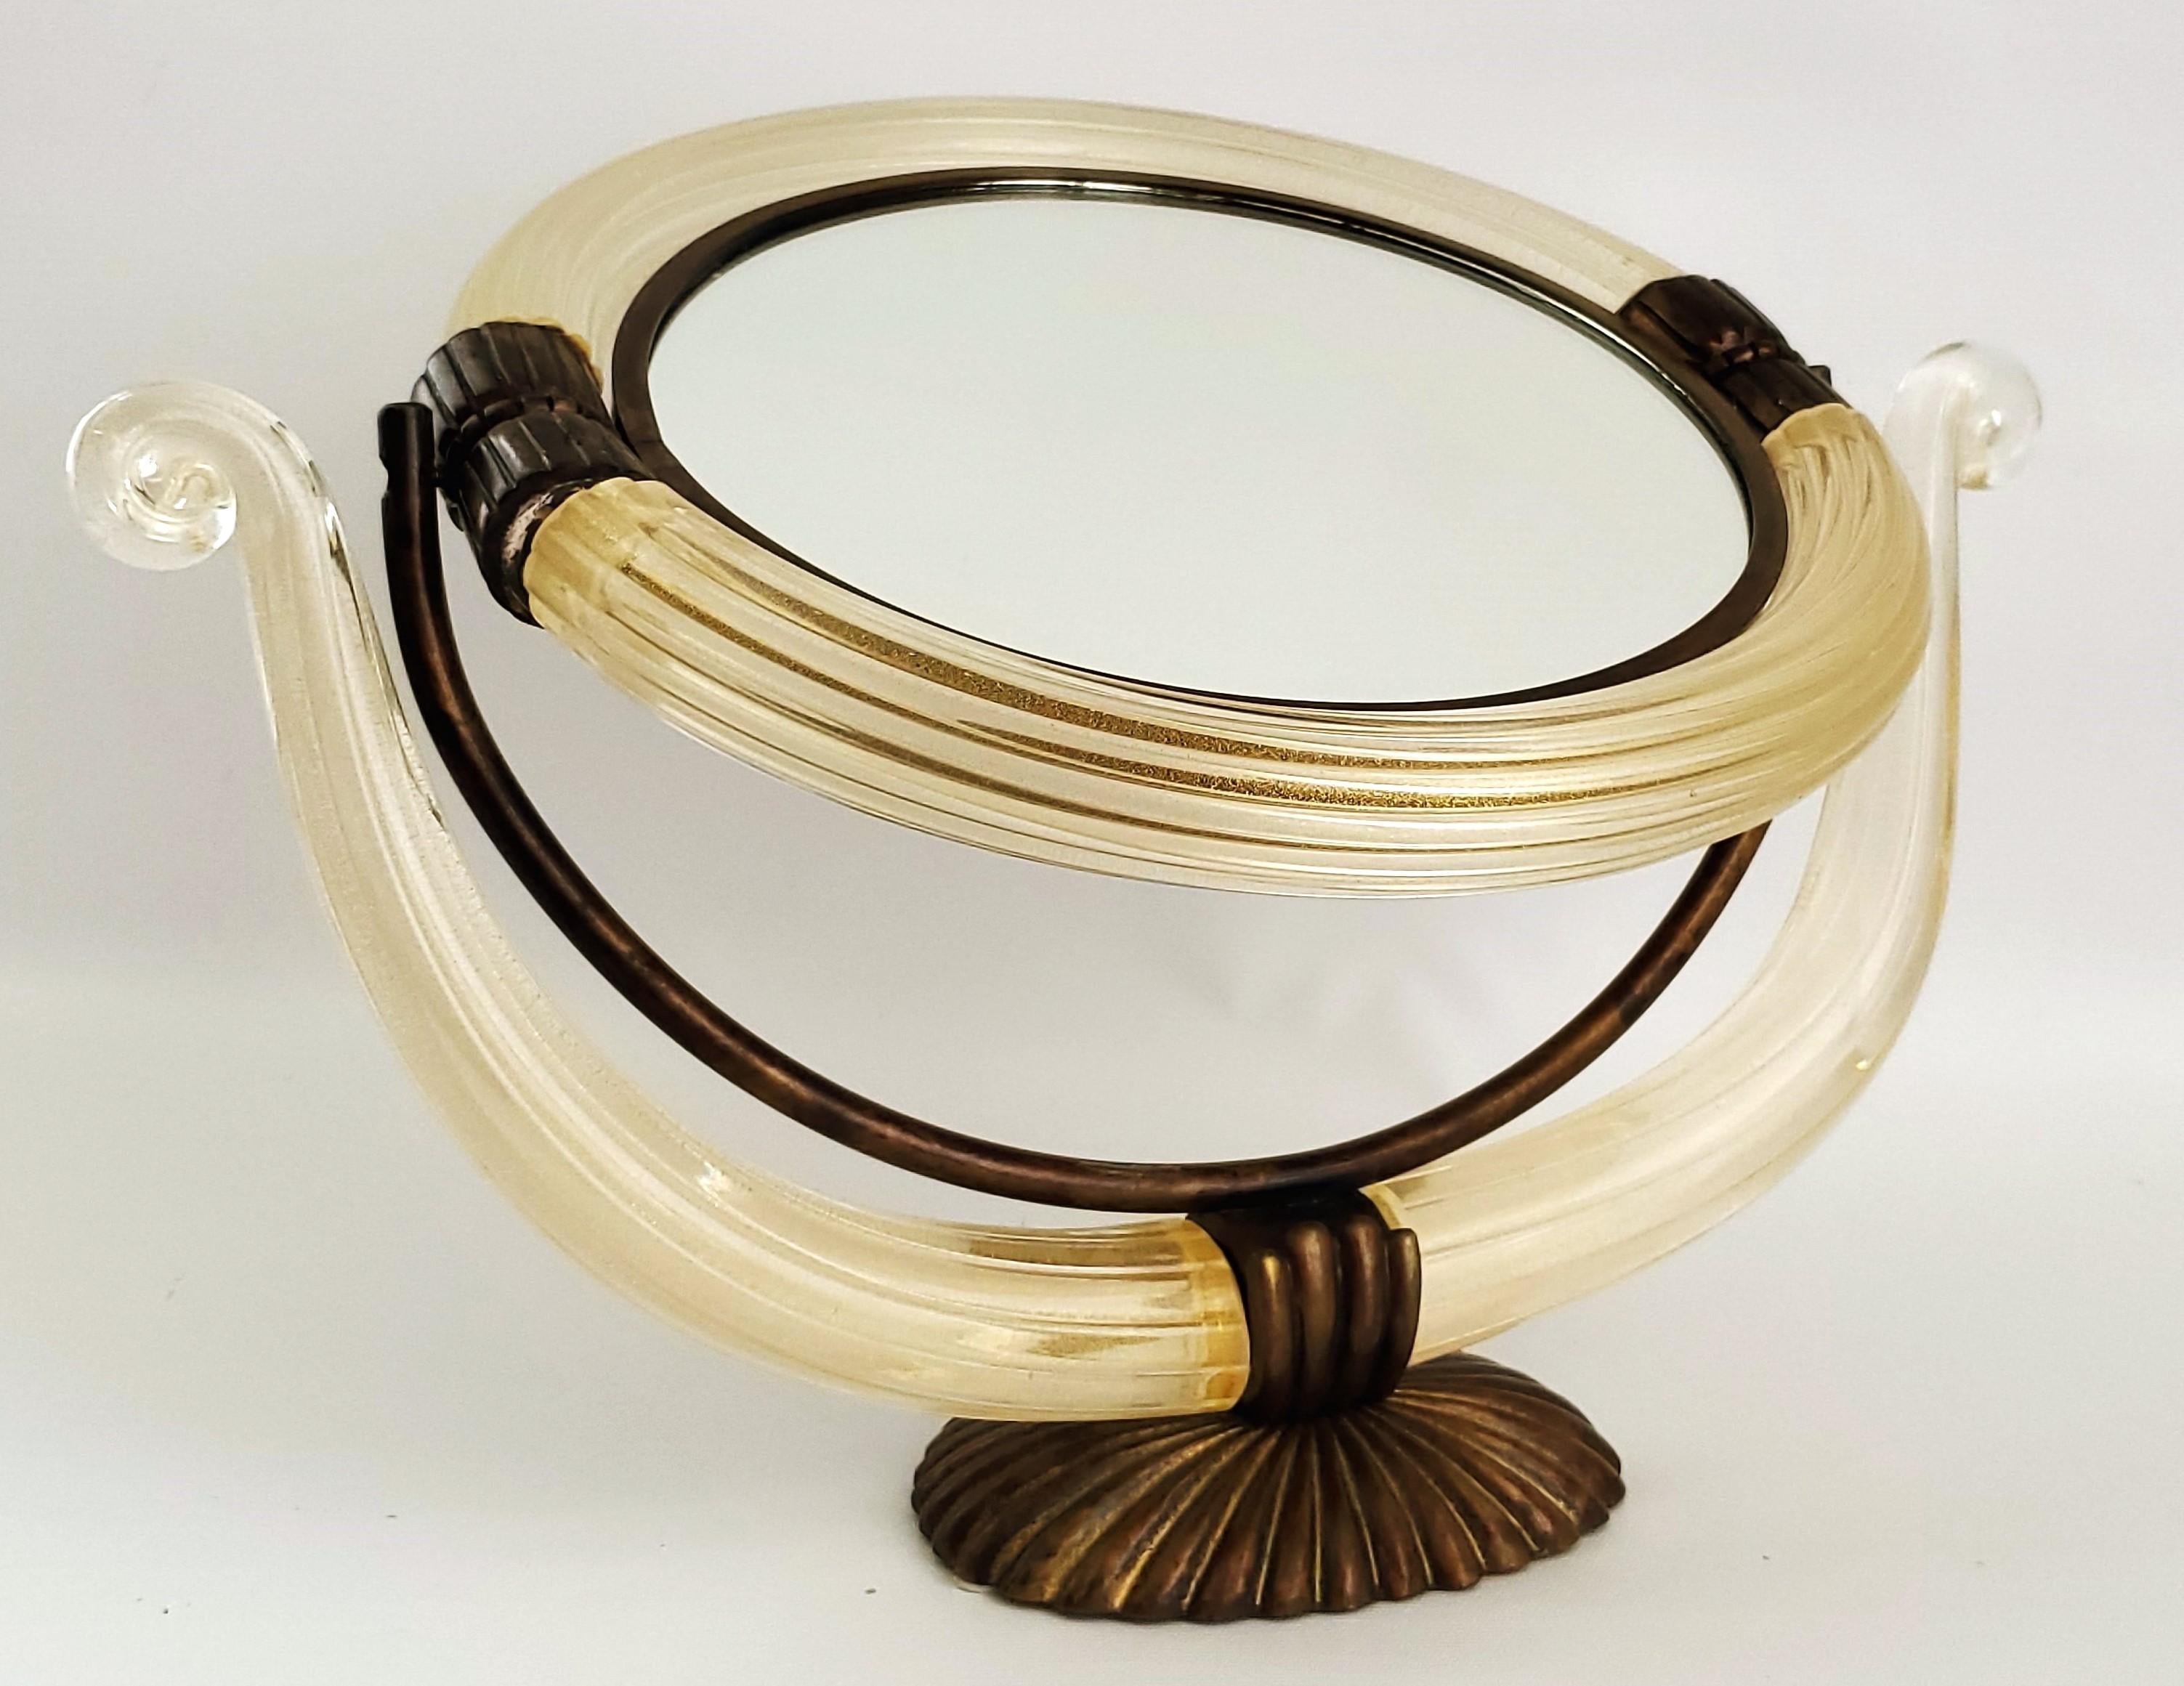 Mid 20th Century Murano glass vanity table mirror made by Barovier, circa 1950s. This remarkable mirror is made with clear ribbed Murano glass with loads of 24K gold flecks throughout the glass. The glass appears light yellow, but in actuality it is